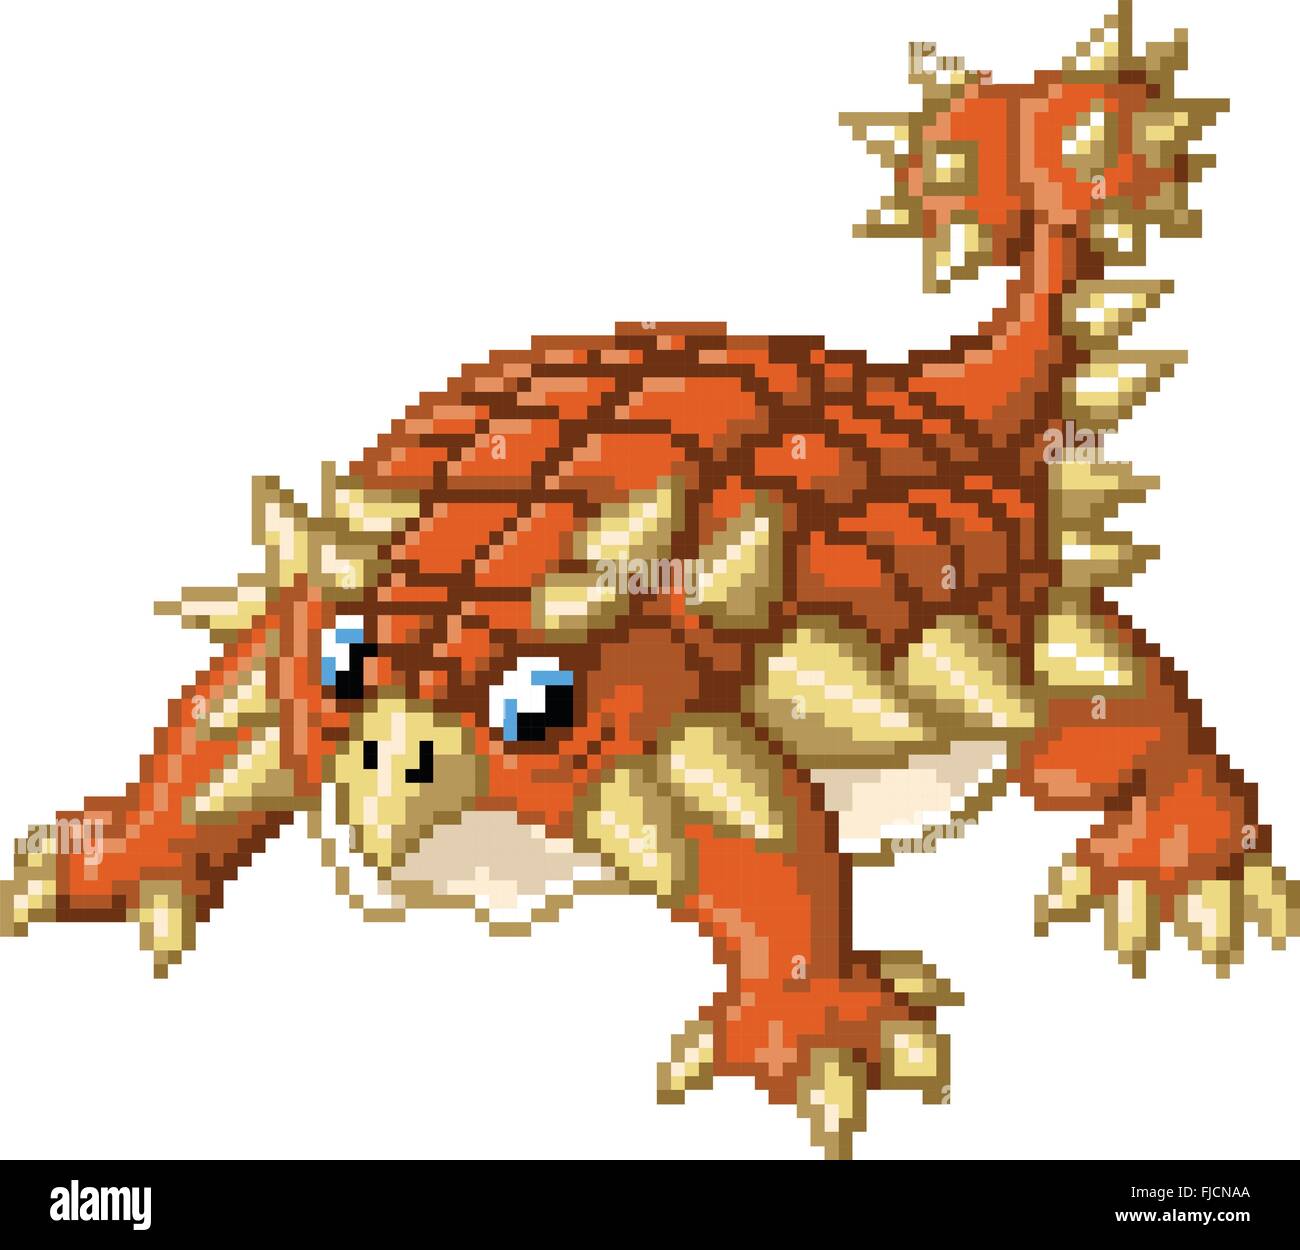 A cute pixel art ankylosaurus stands in a battle-ready pose. Created in the 8-bit/16-bit art style of video games from the 80's. Stock Vector